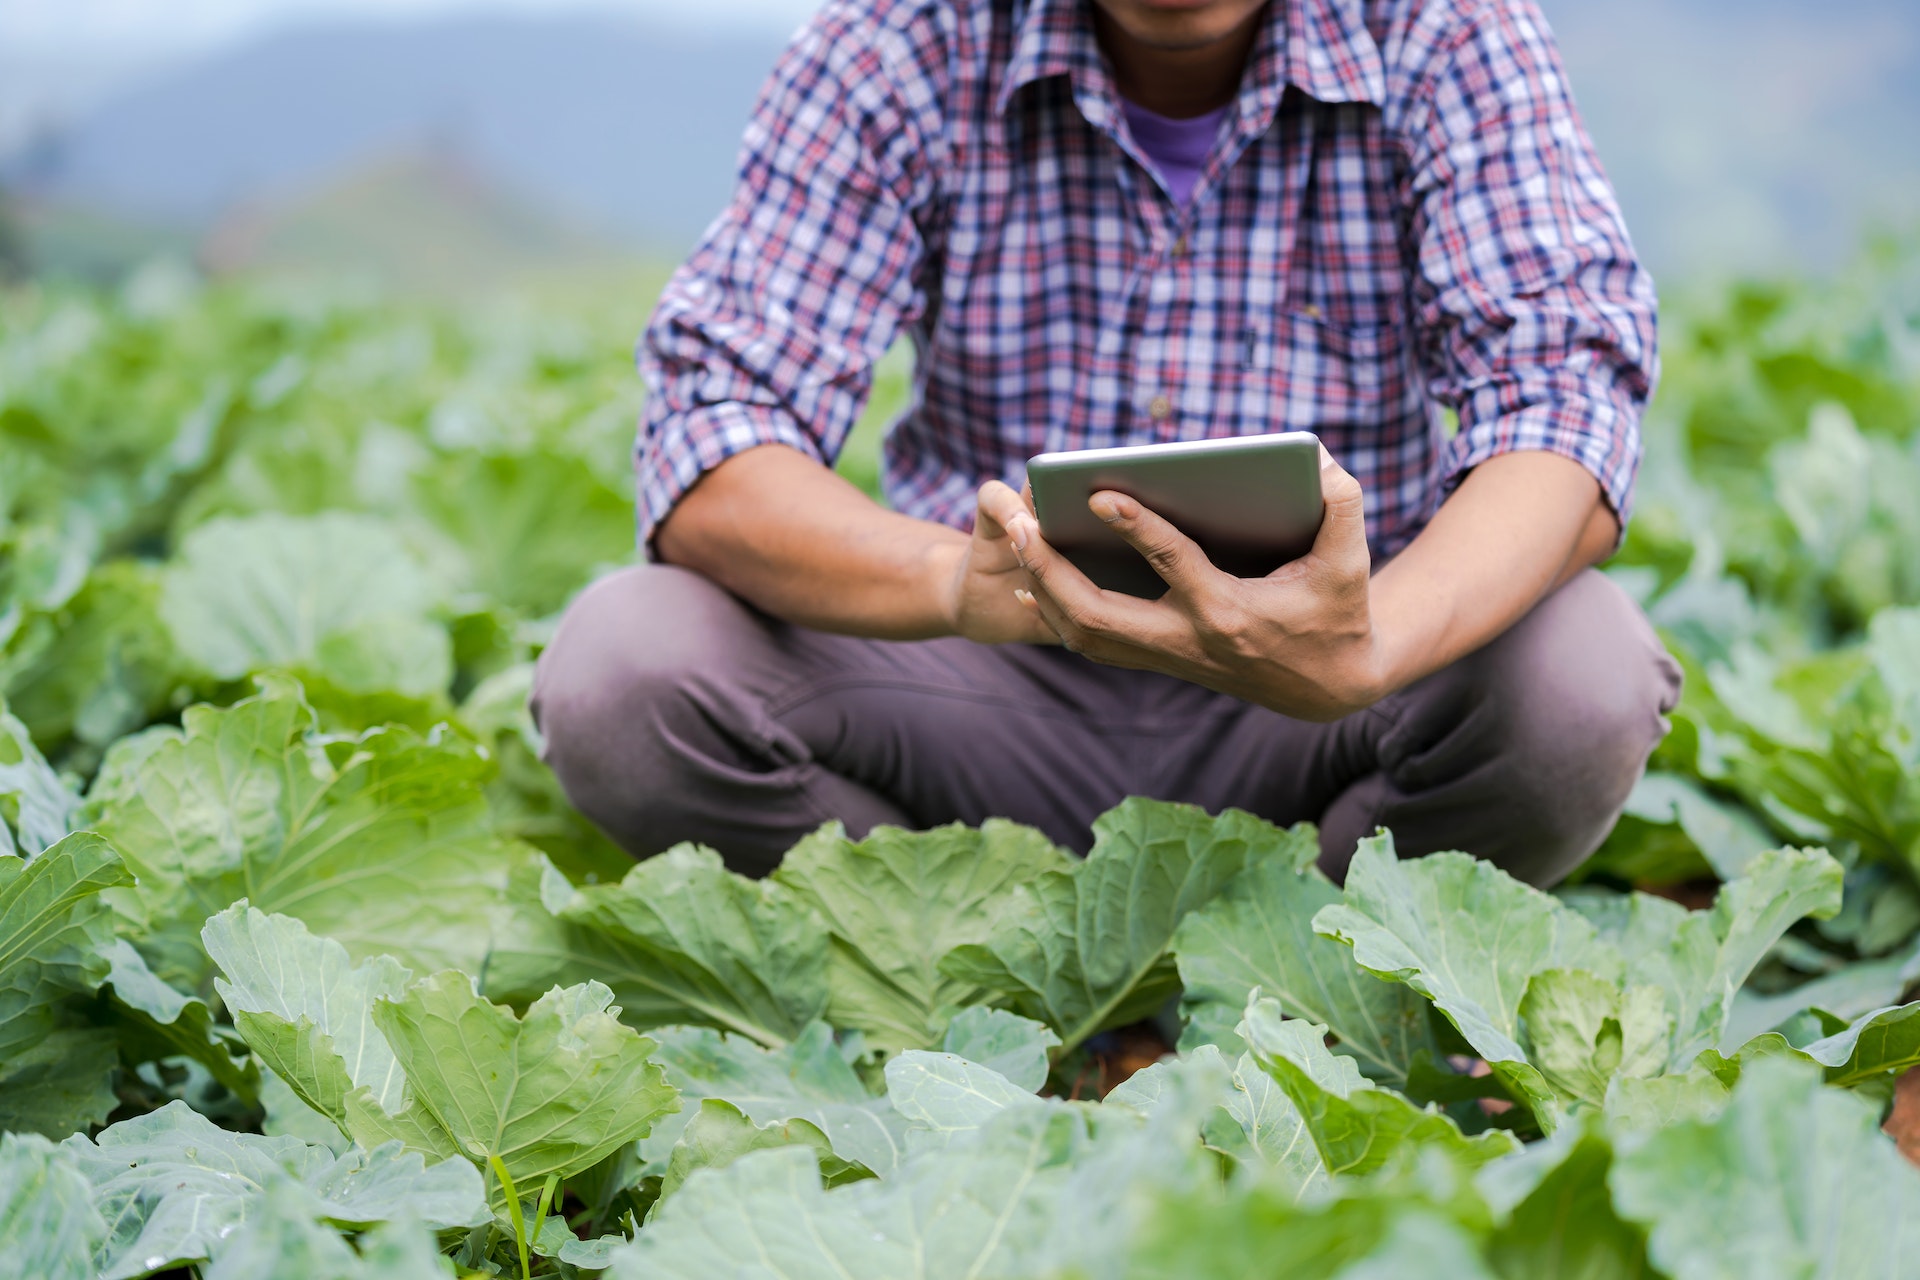 Modernisation is described as the use of modern technologies in agriculture